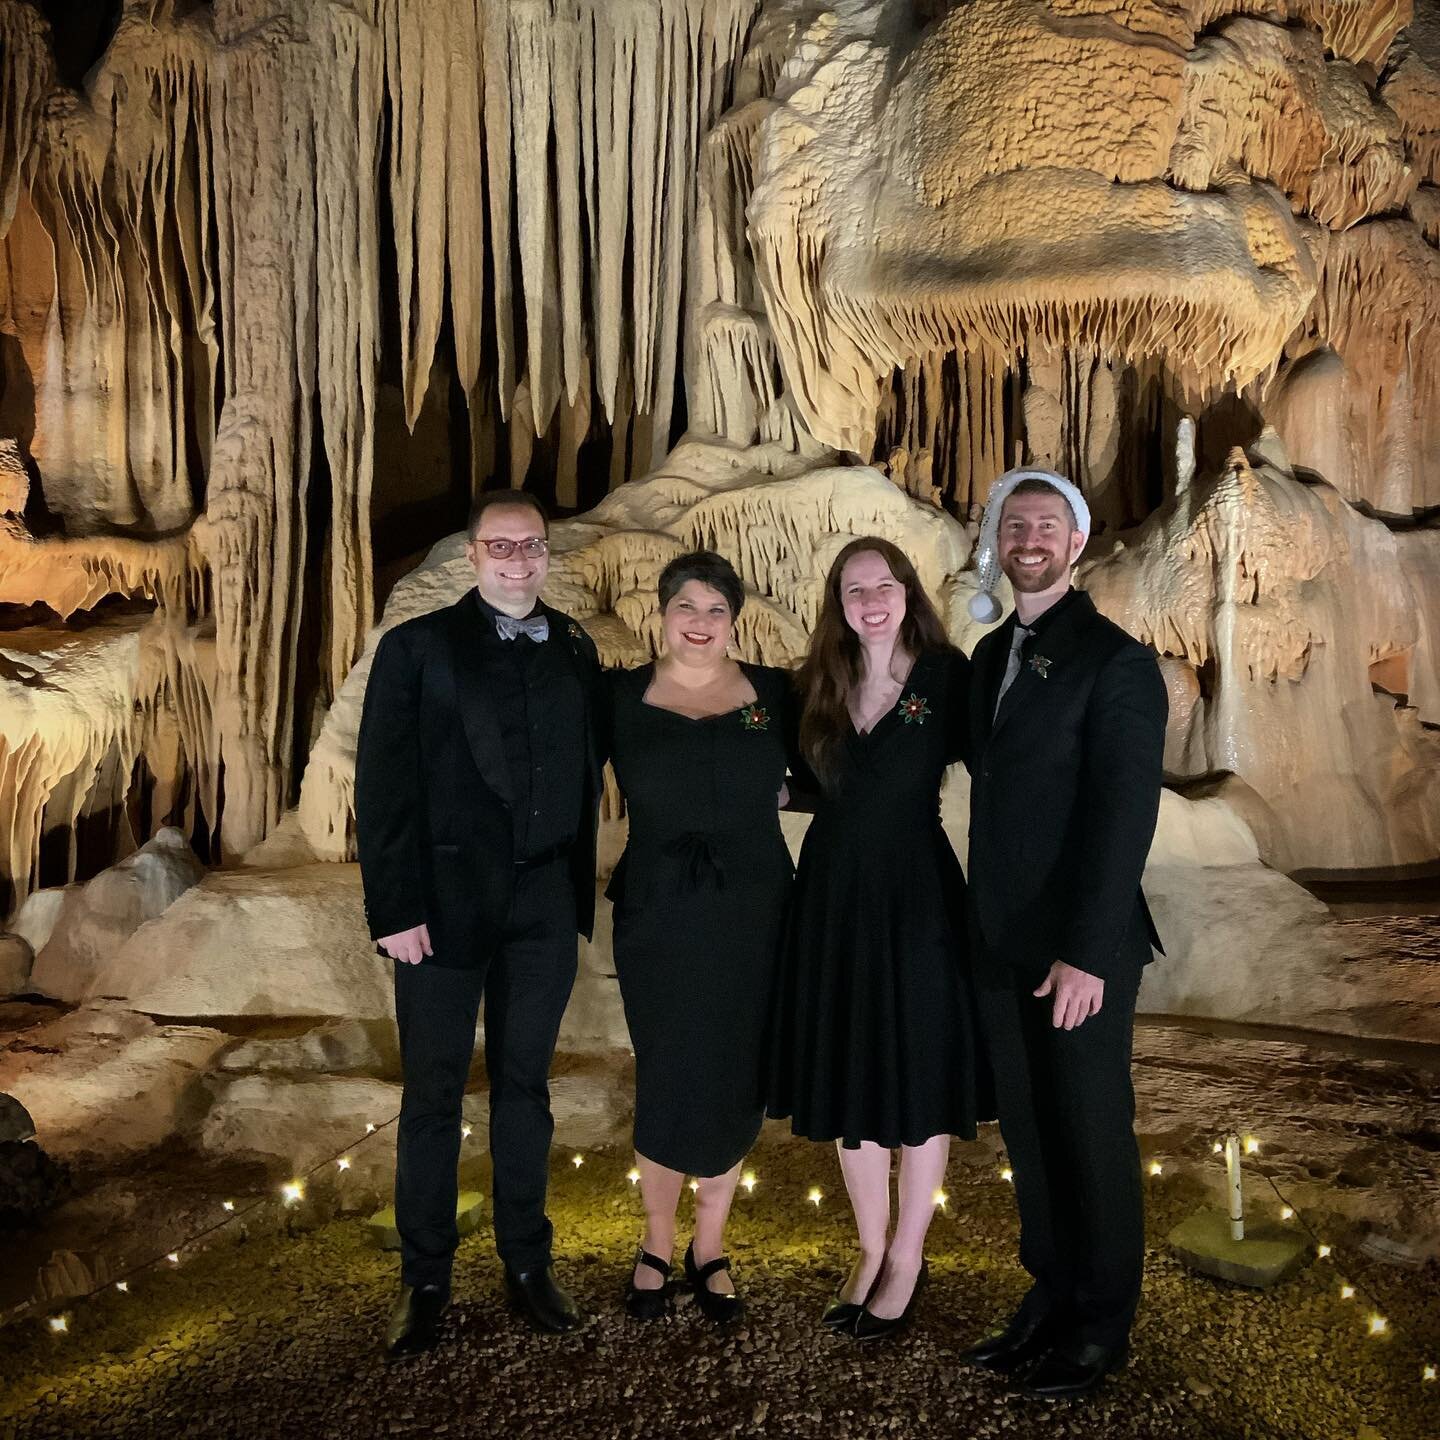 Our annual concert at @cavewithoutaname tonight was a great success! Thanks to everyone who came out and get your tickets early next year, we sold out weeks ago! #atxmusic #tinsel #tinselsingers #boerne #boernetexas